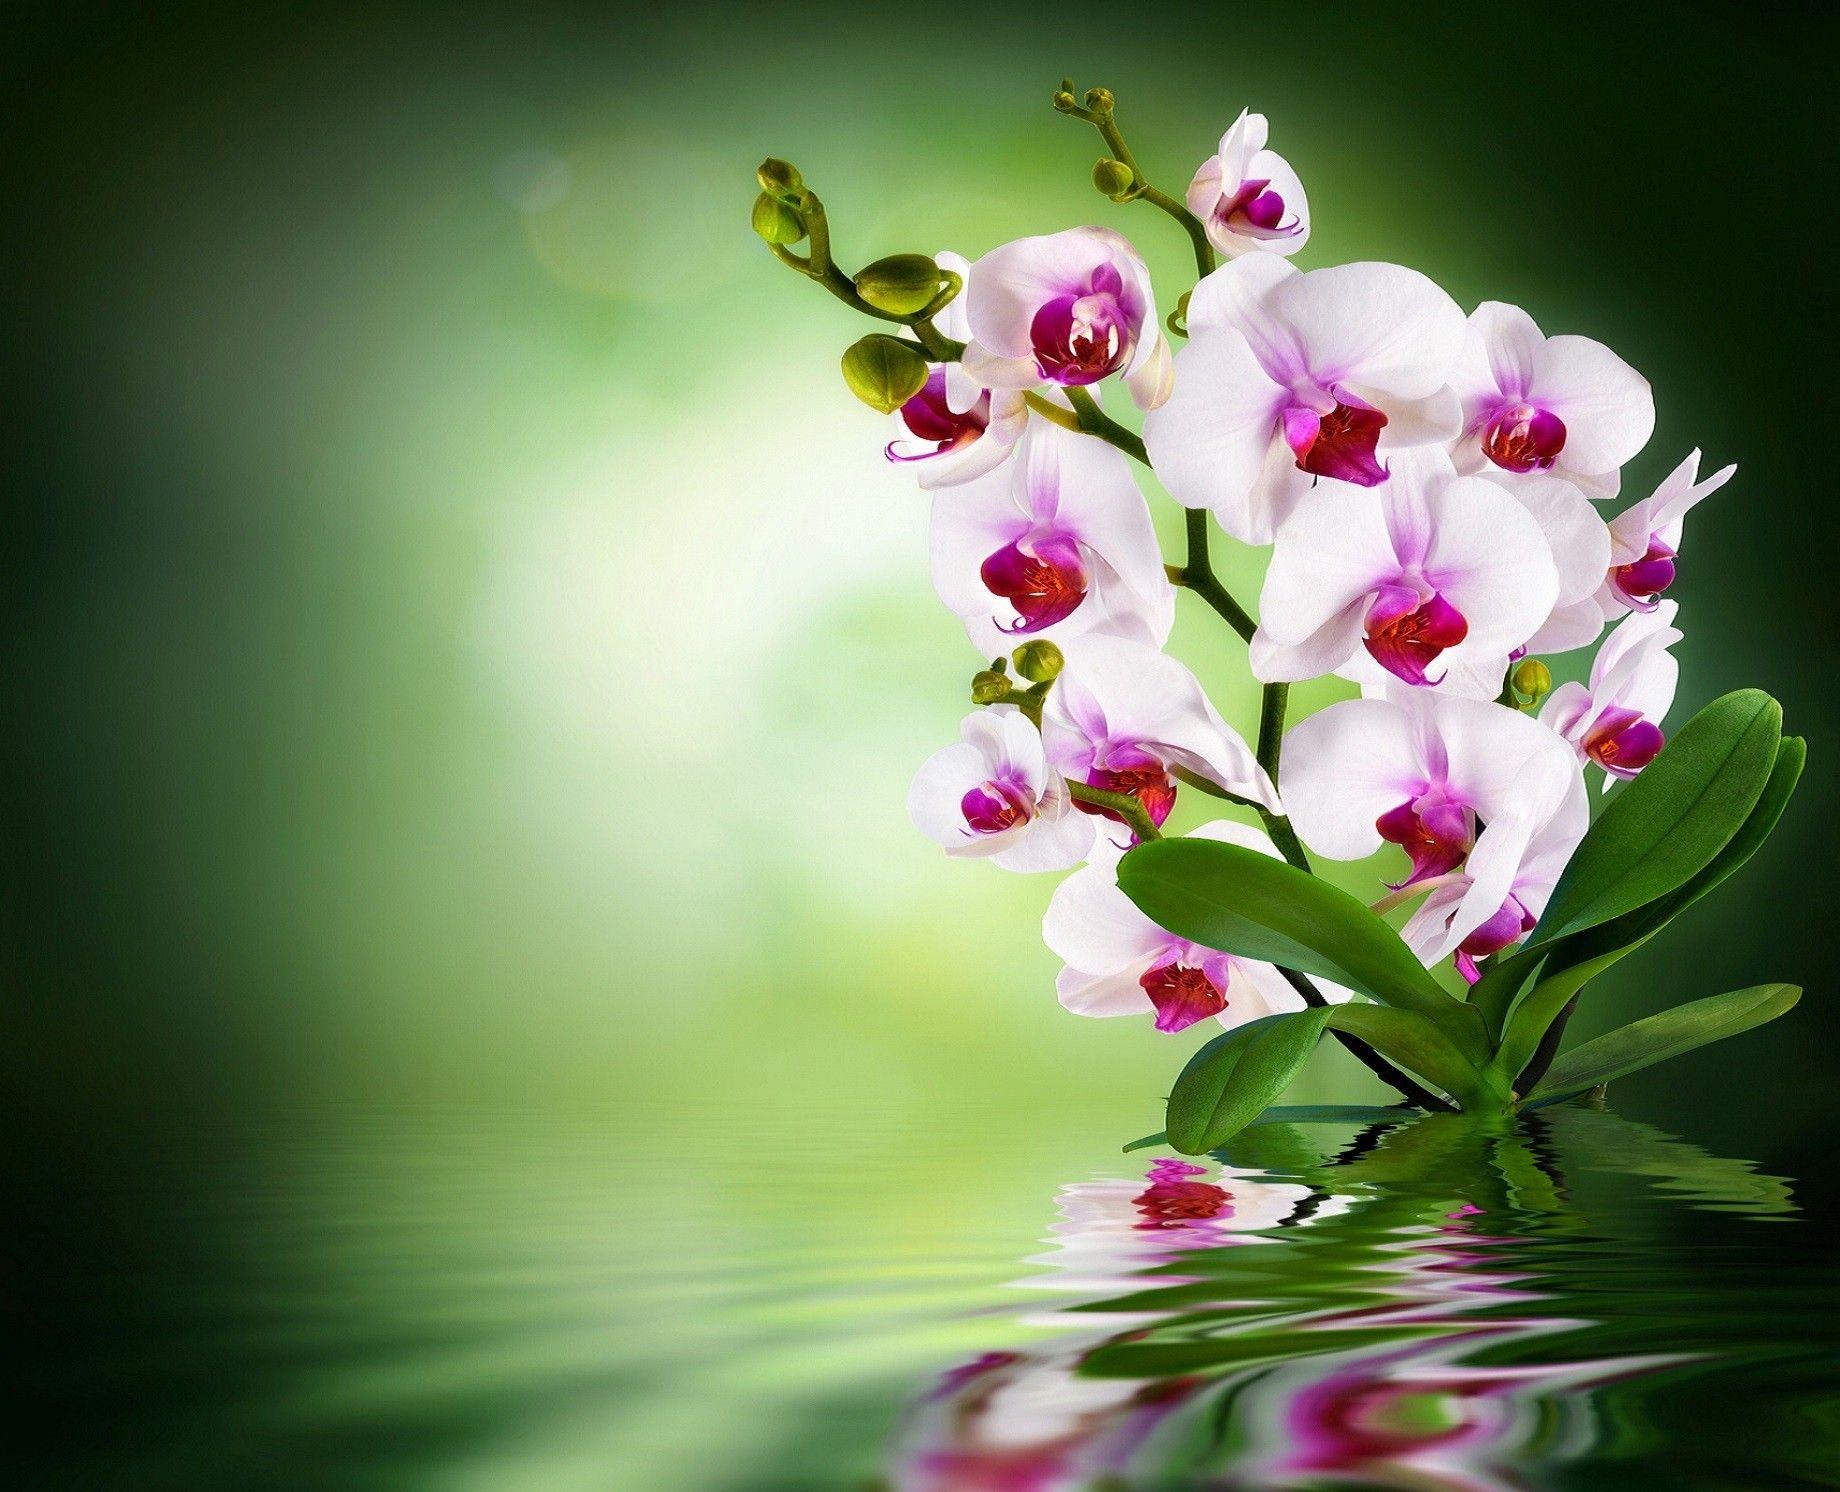 83 Wallpaper Hd For Mobile Orchids For FREE - MyWeb